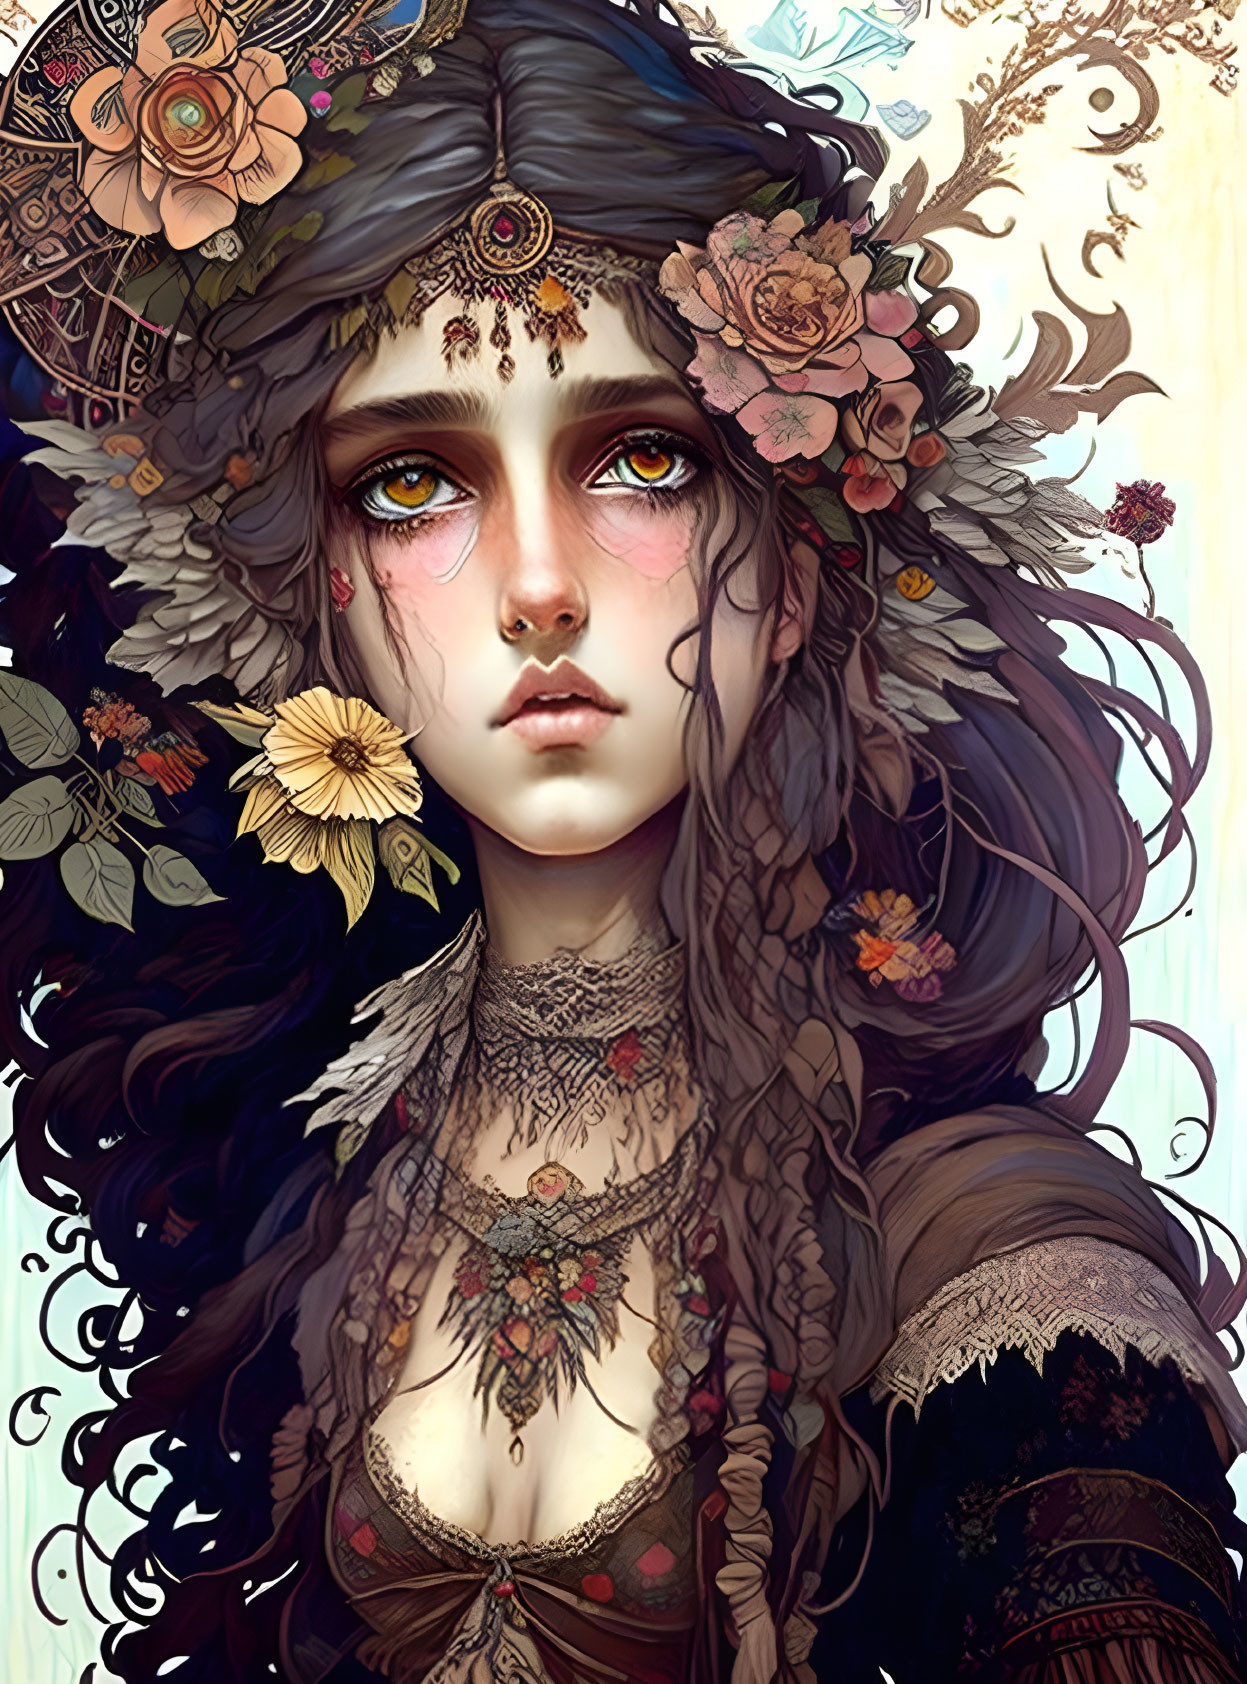 Girl with Dark Wavy Hair Adorned with Flowers and Jewelry